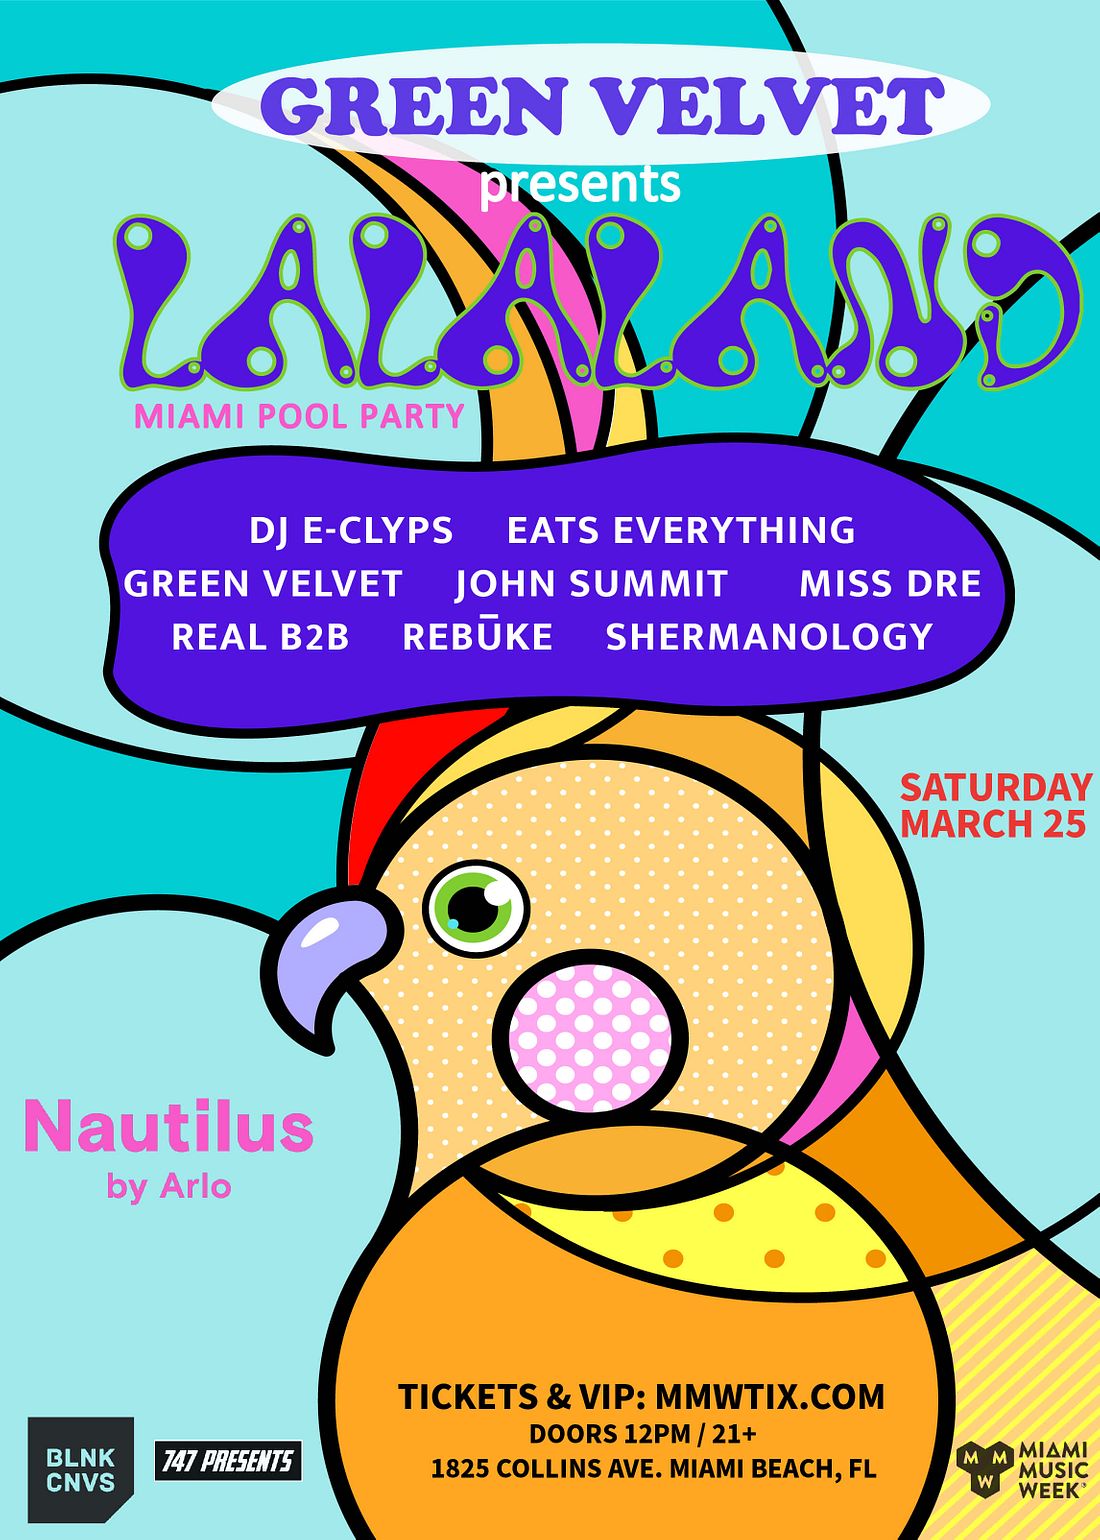 Green Velvet presents LaLaLand Pool Party Image